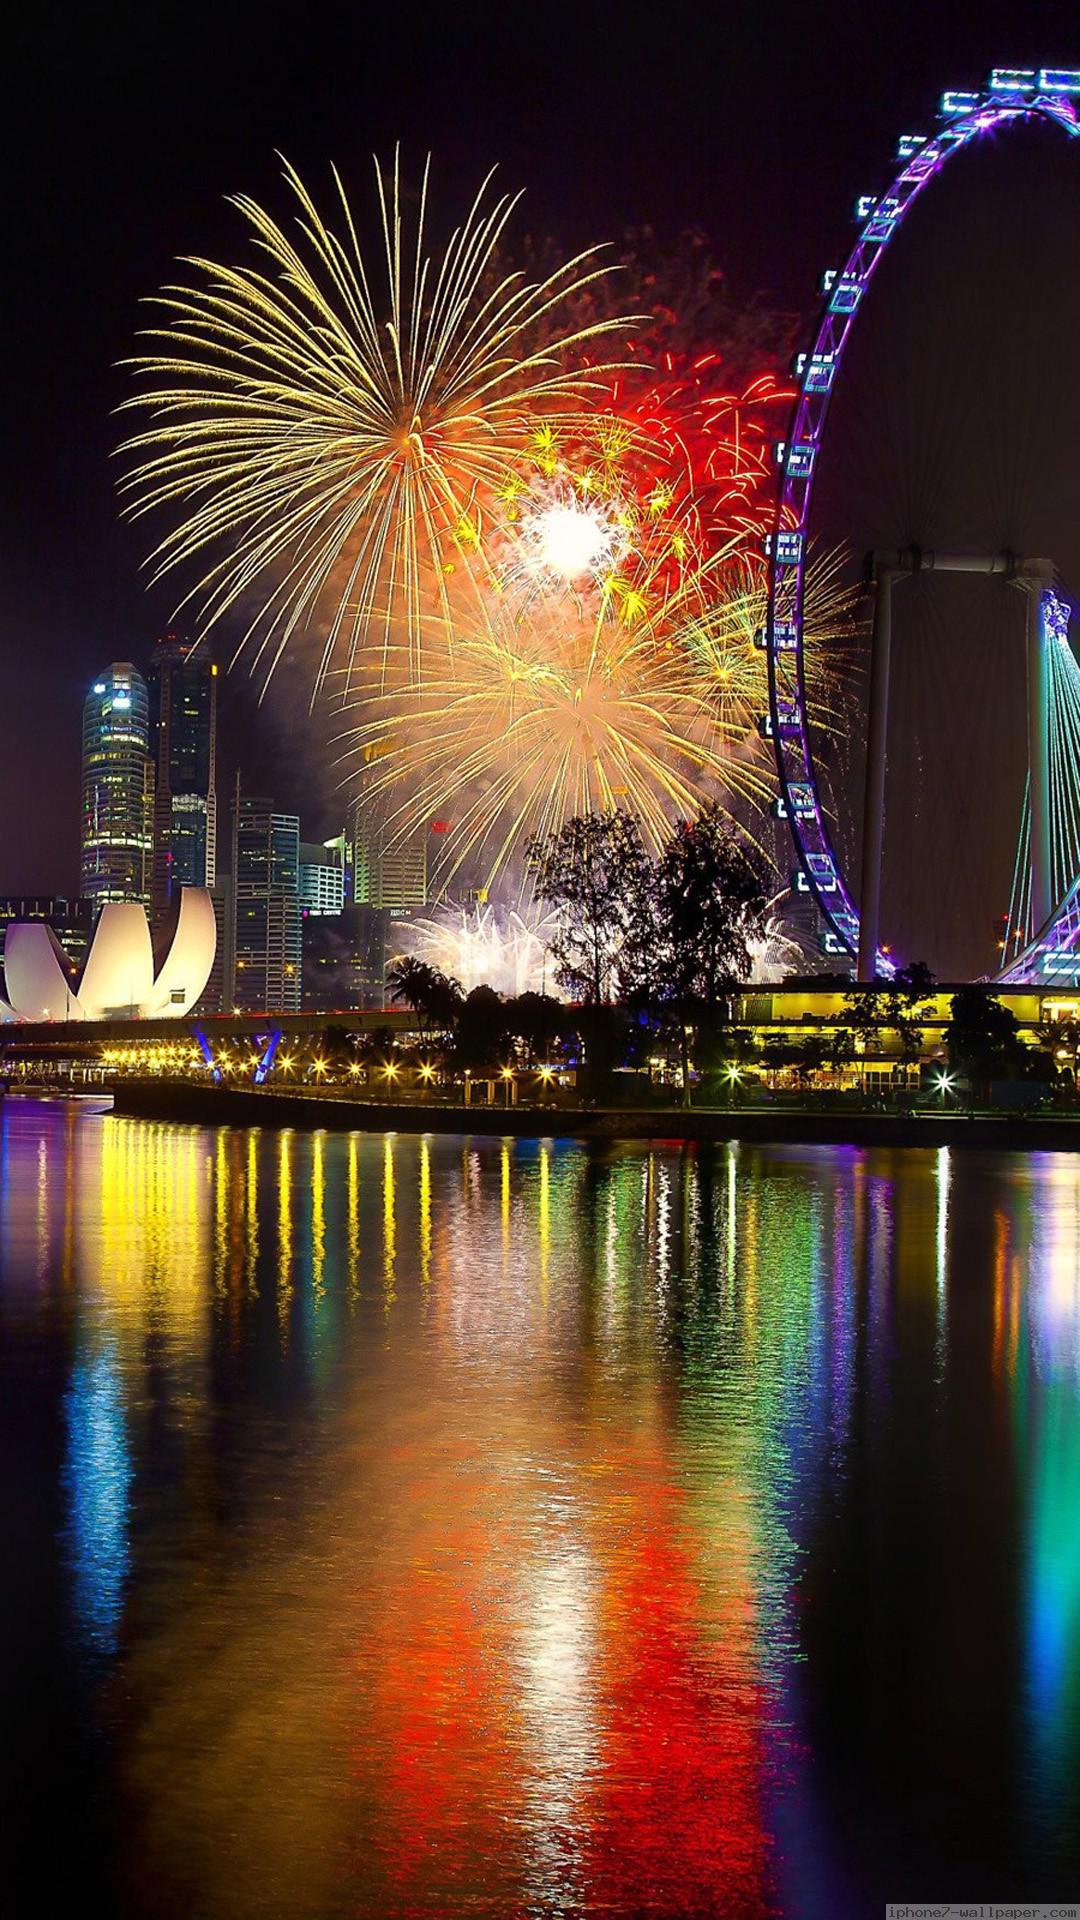 Wallpaper Image Fireworks at night in Singapore iPhone 7